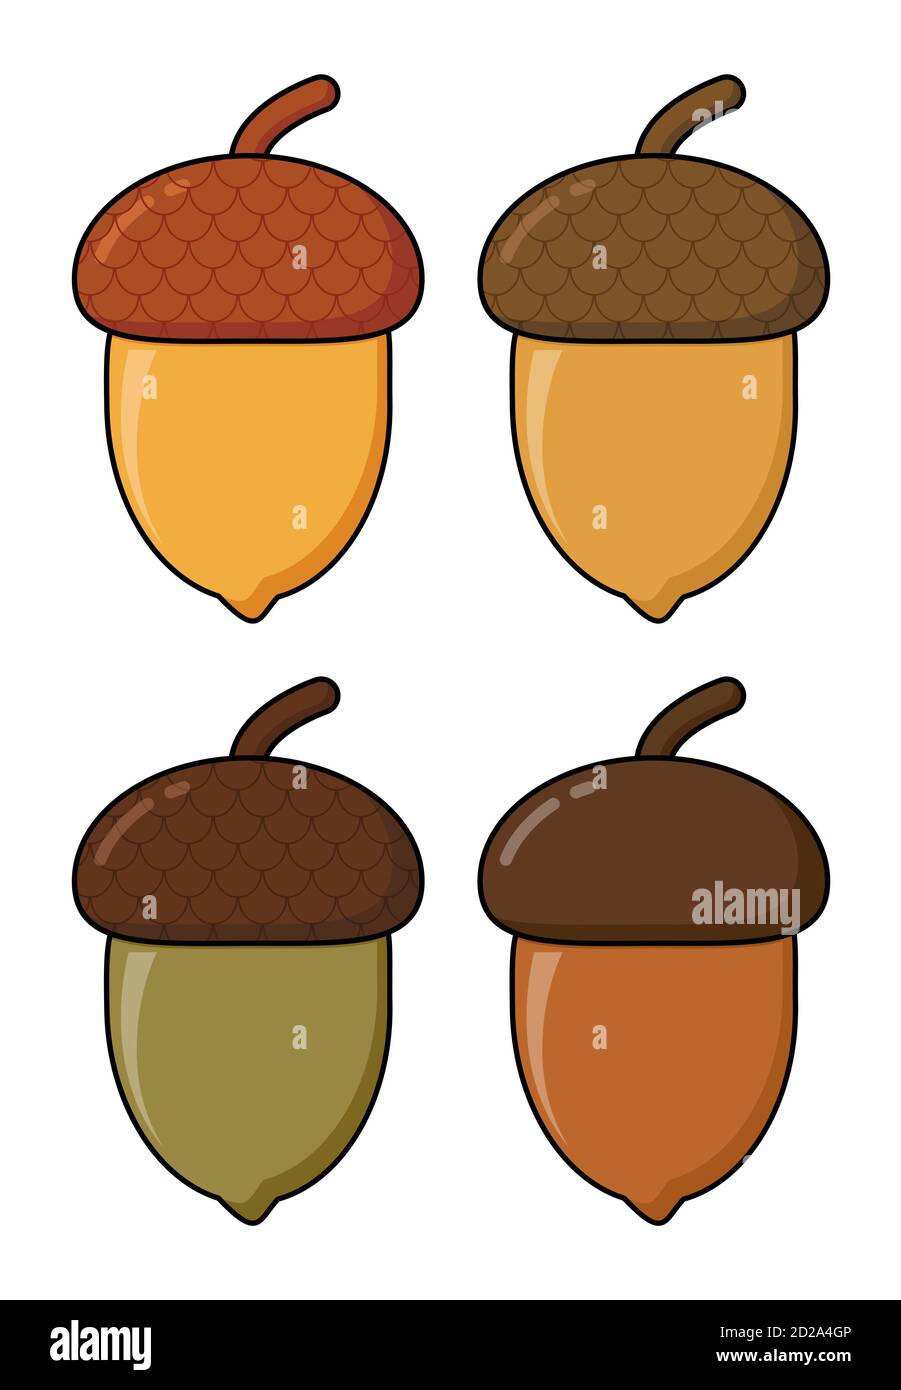 Acorn  cartoon vector set isolated on white. Oak tree fruits with cap  icon set in different colors. Illustration of autumnal oak nut acorns with shel Stock Vector